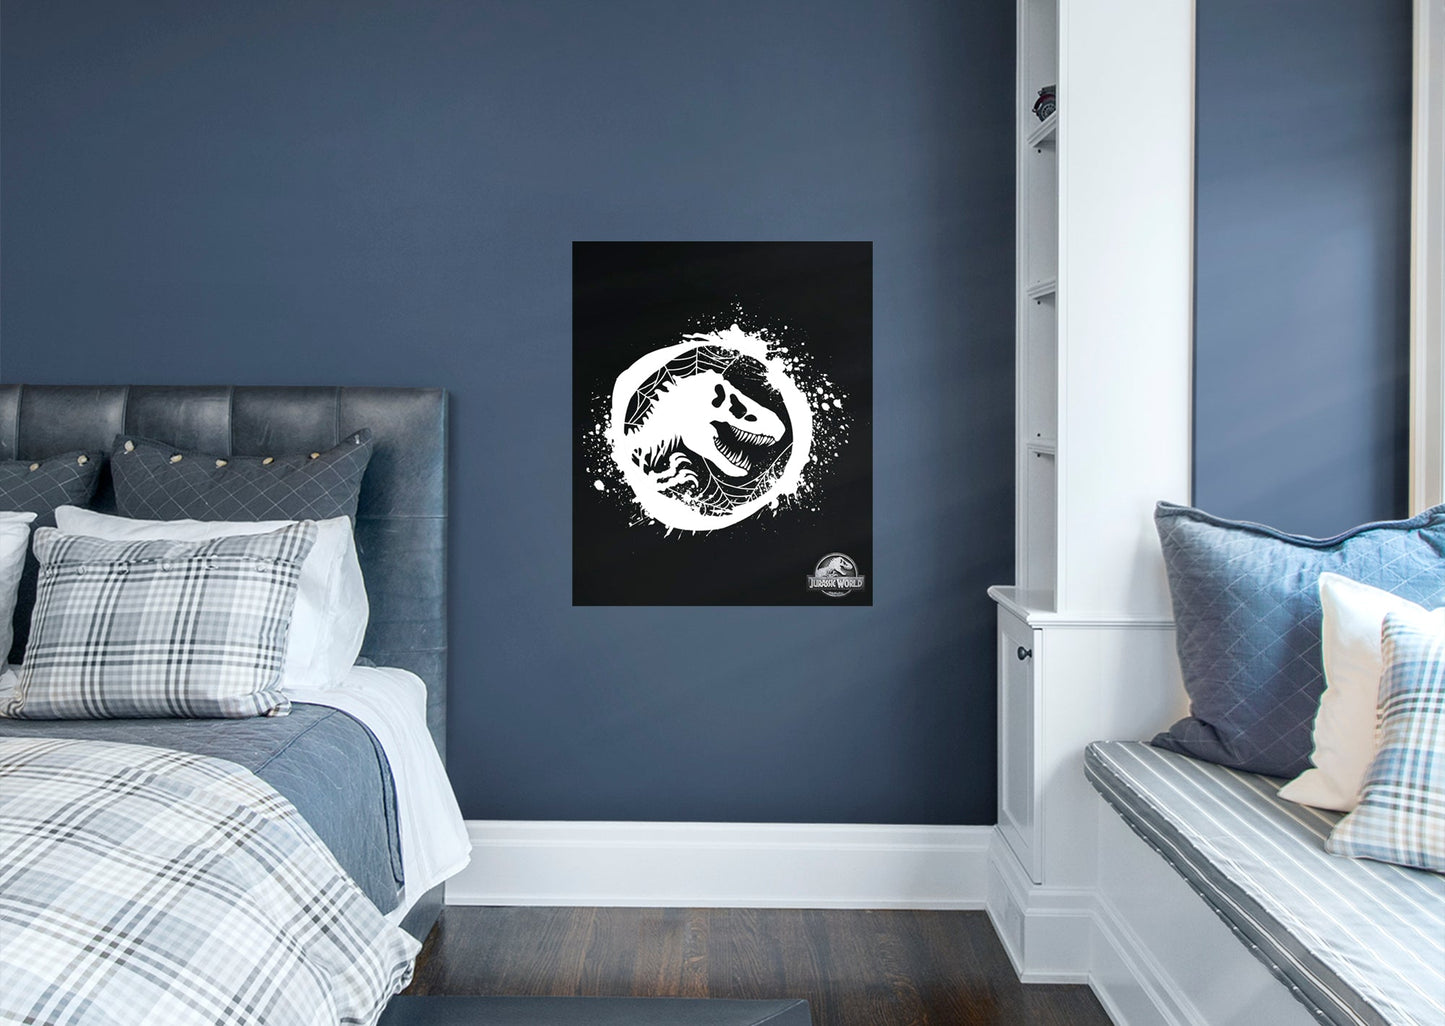 Jurassic World:  Halloween Web Logo Mural        - Officially Licensed NBC Universal Removable Wall   Adhesive Decal